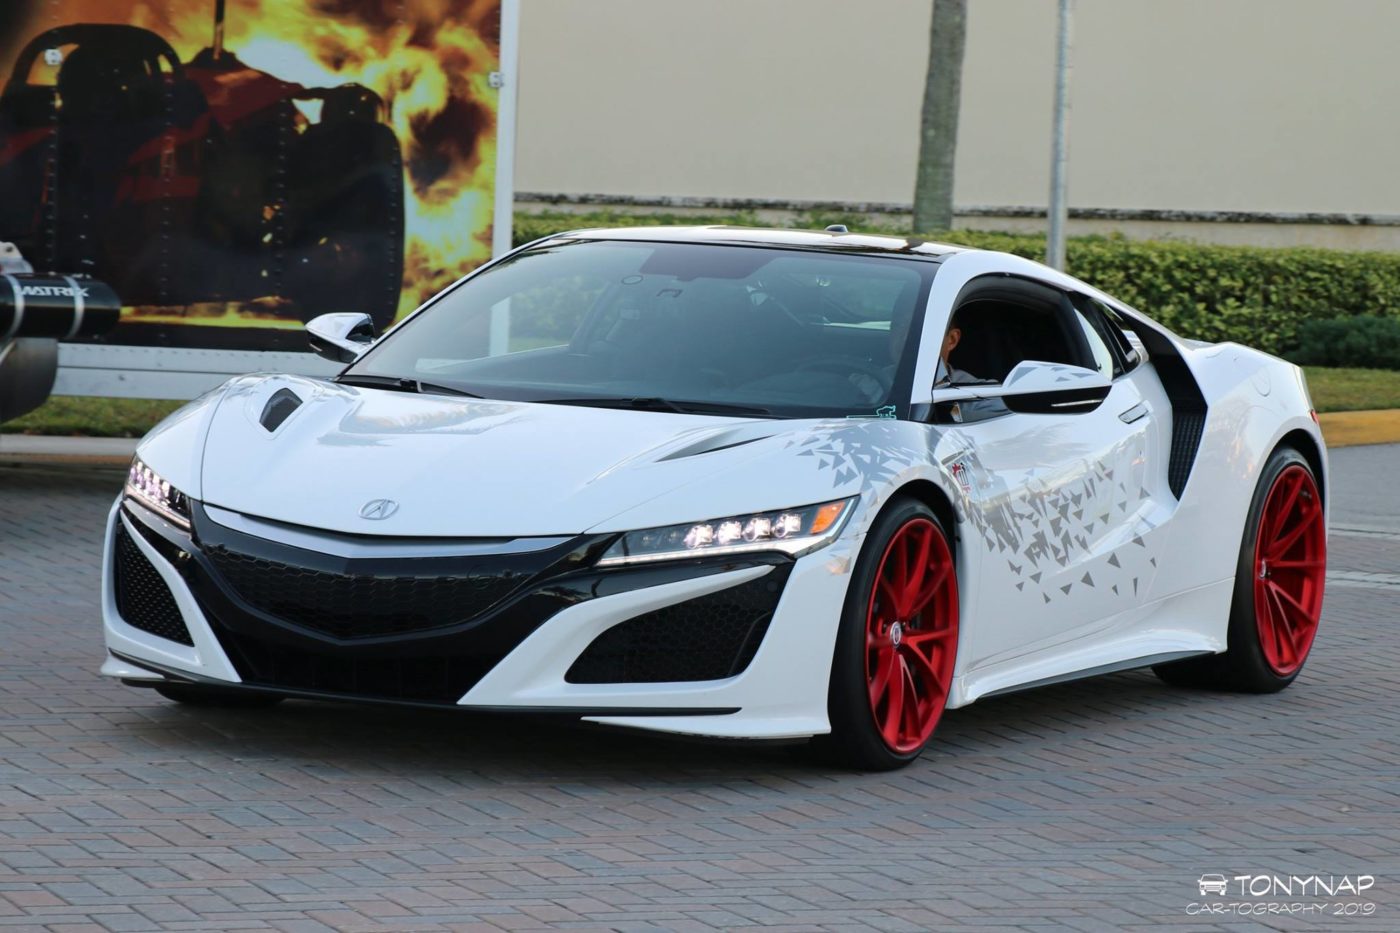 Every aerodynamic aspect of the Acura nsx is functional and visually appealing